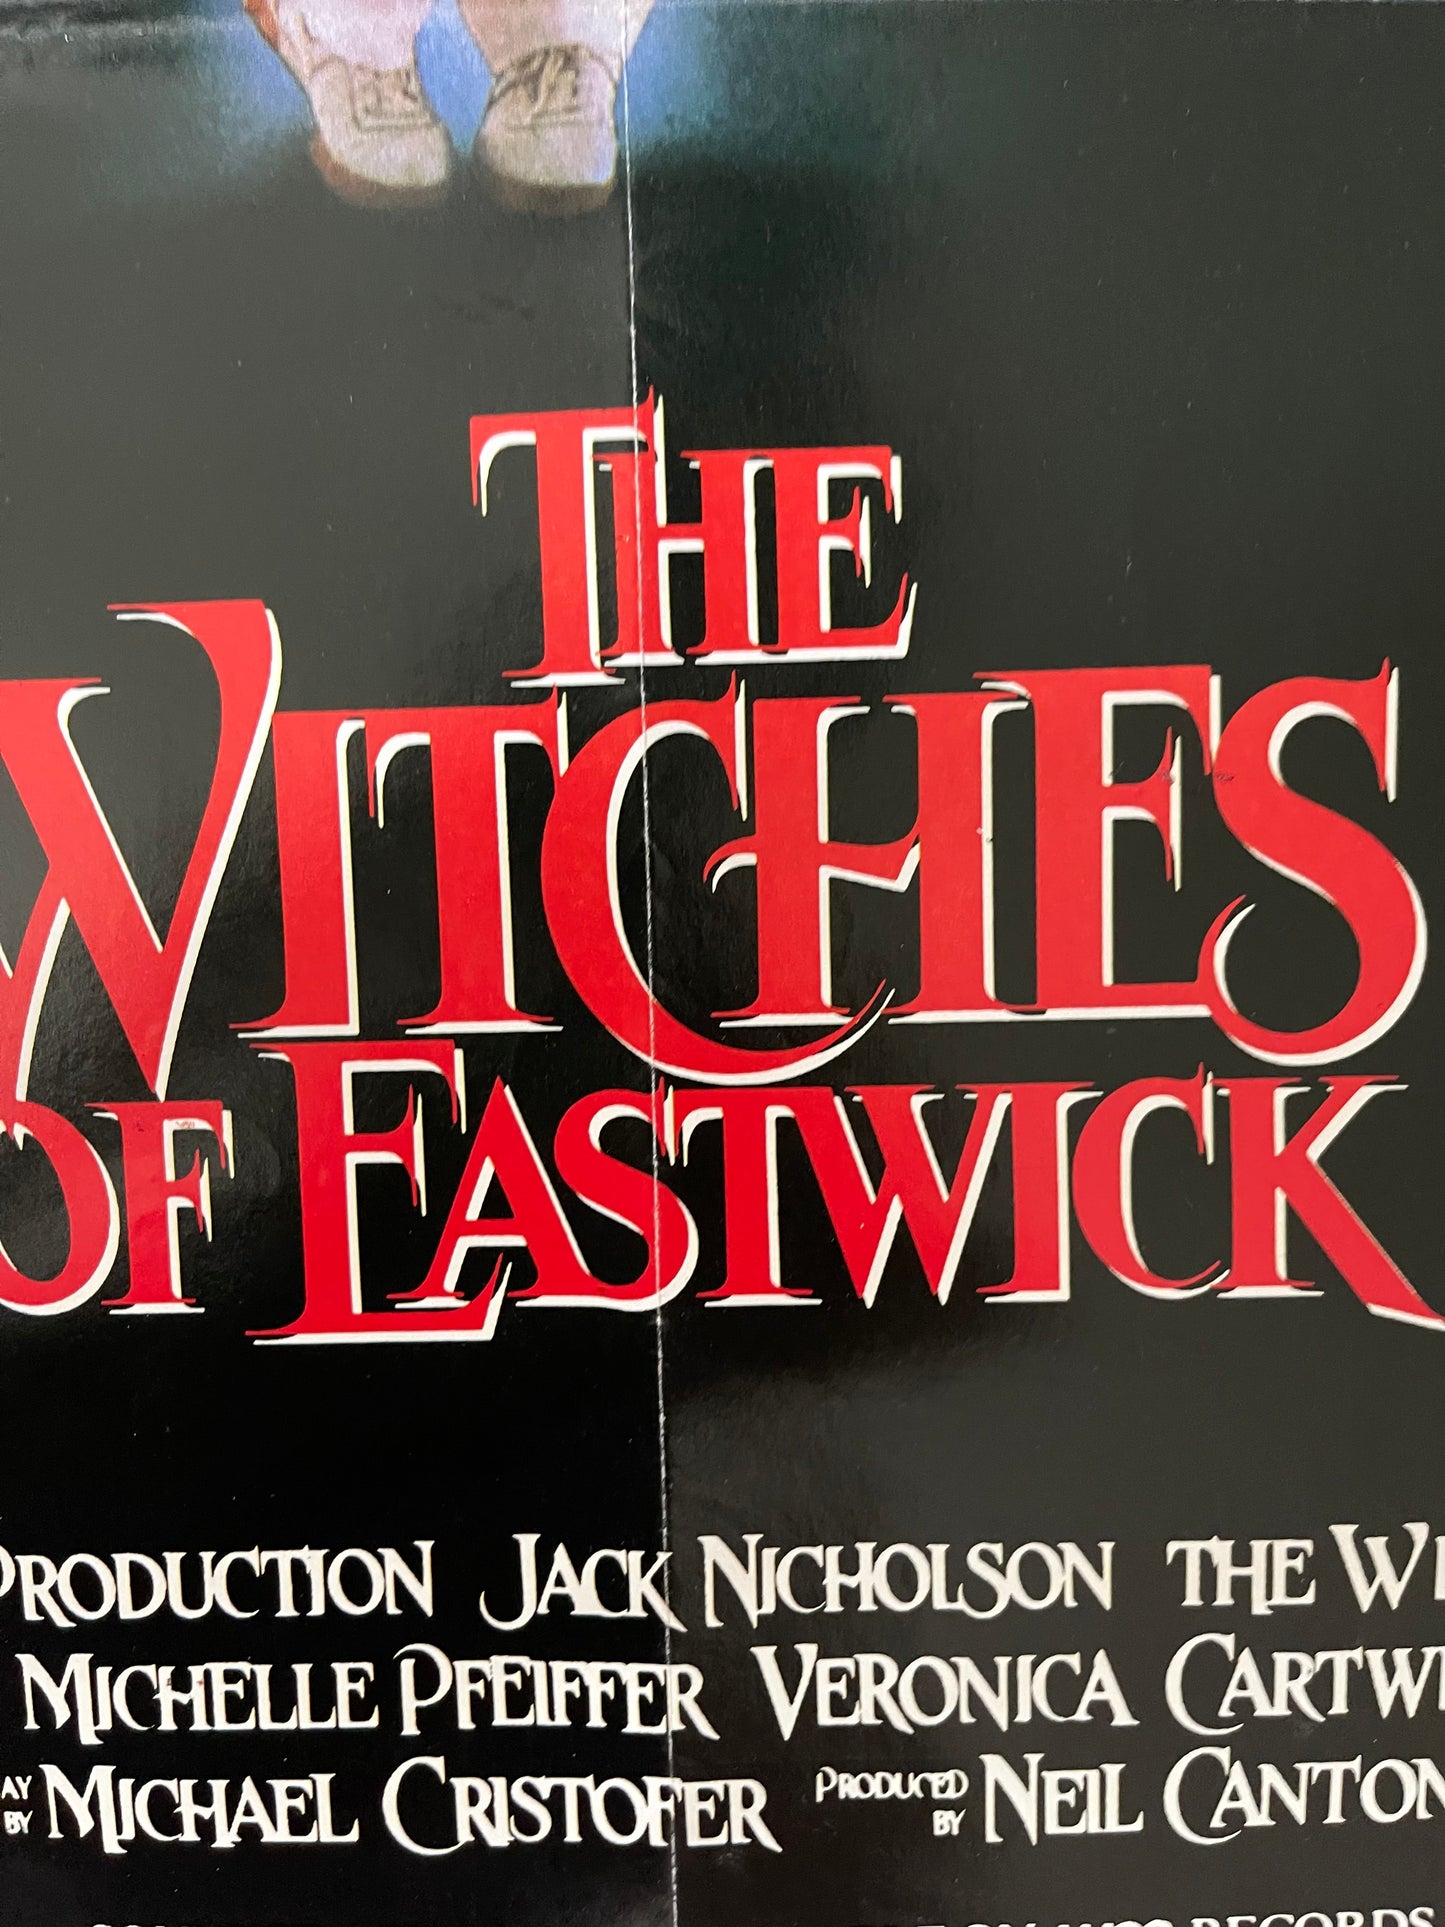 The Witches of Eastwick (1987) - One Sheet